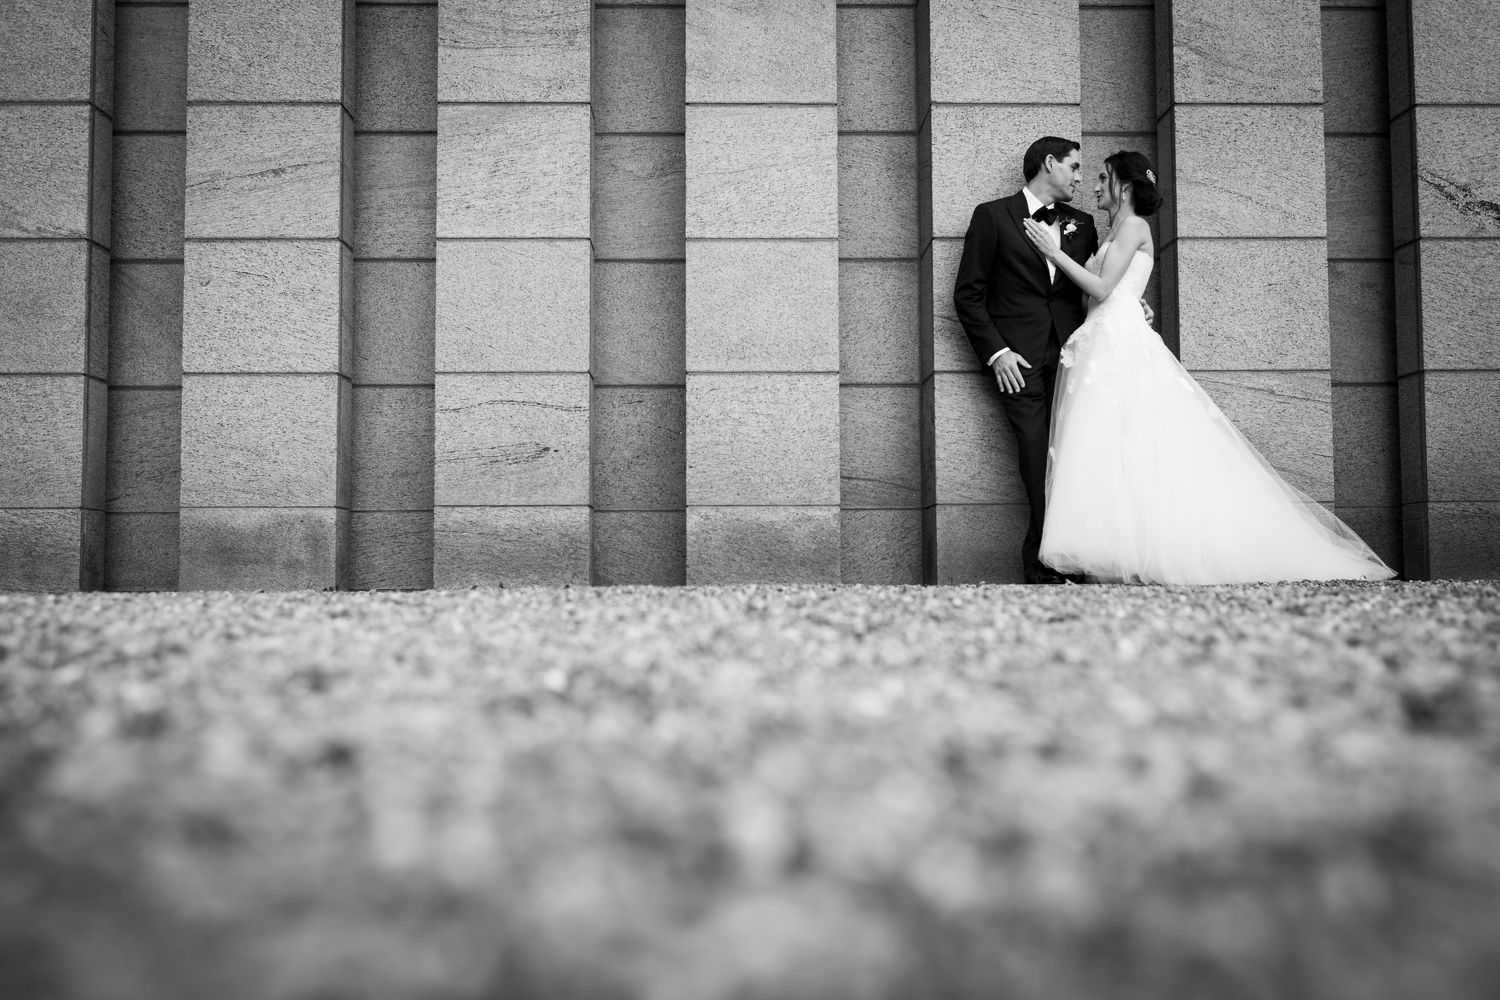 Wedding photograph of a bride and groom outside near the national art gallery